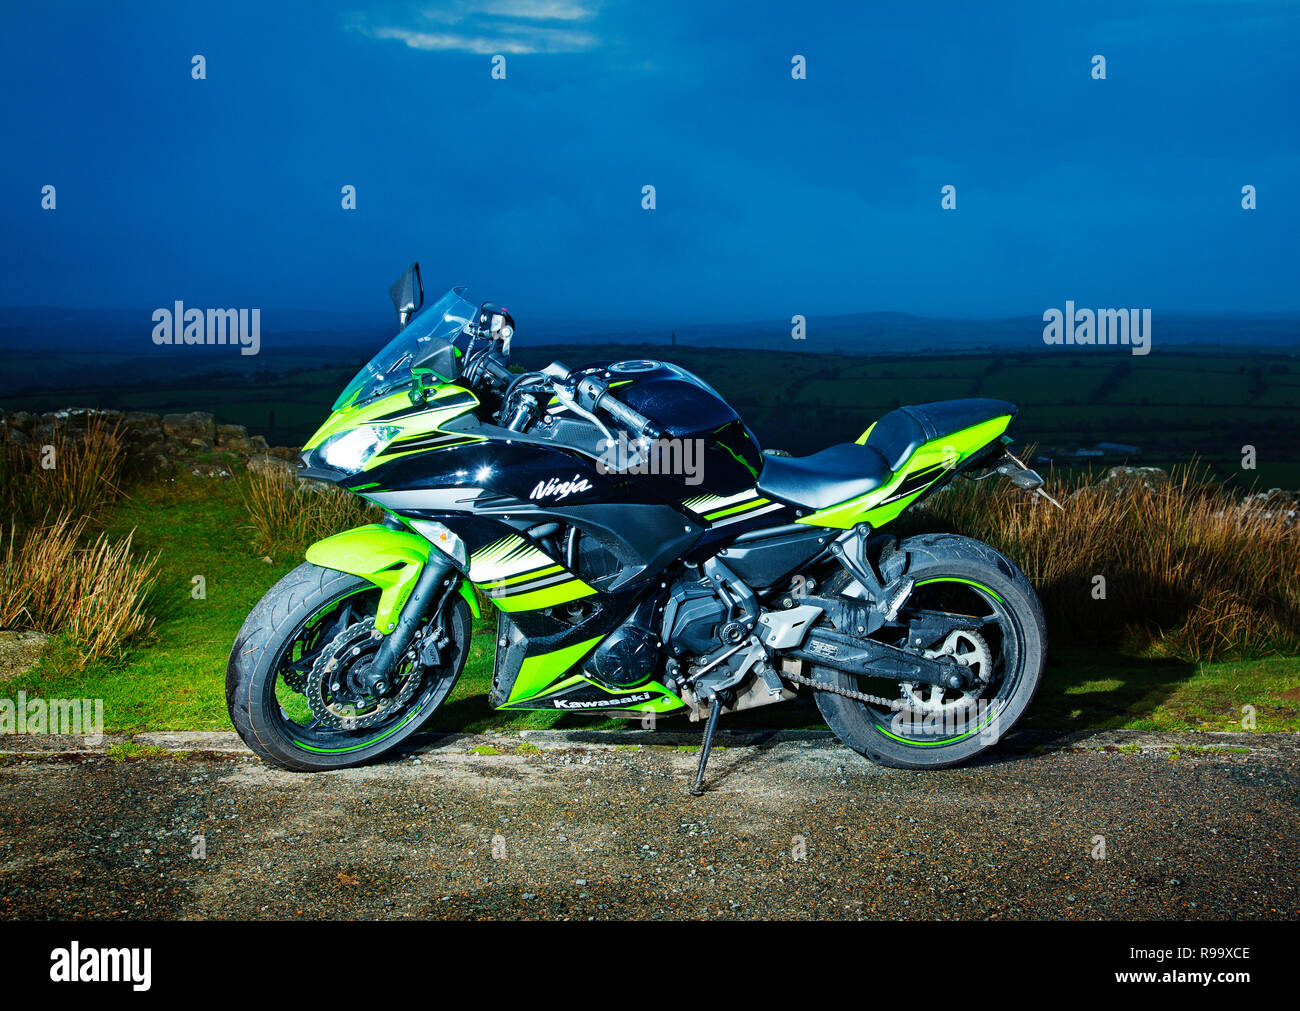 A motorbike parked up at dusk Stock Photo